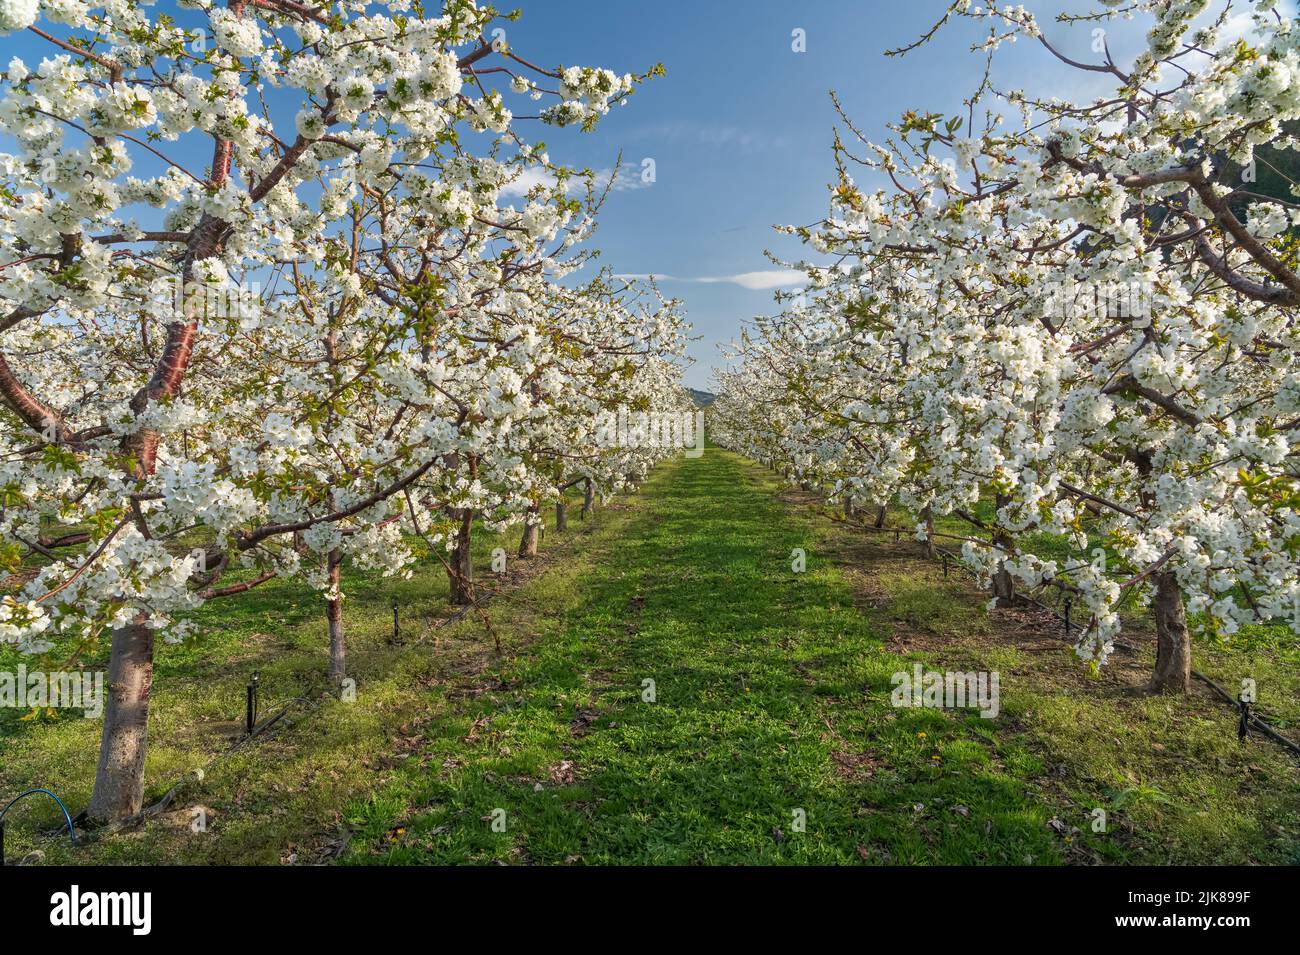 An apple orchard in full bloom near Oliver, British Columbia, Canada. Stock Photo